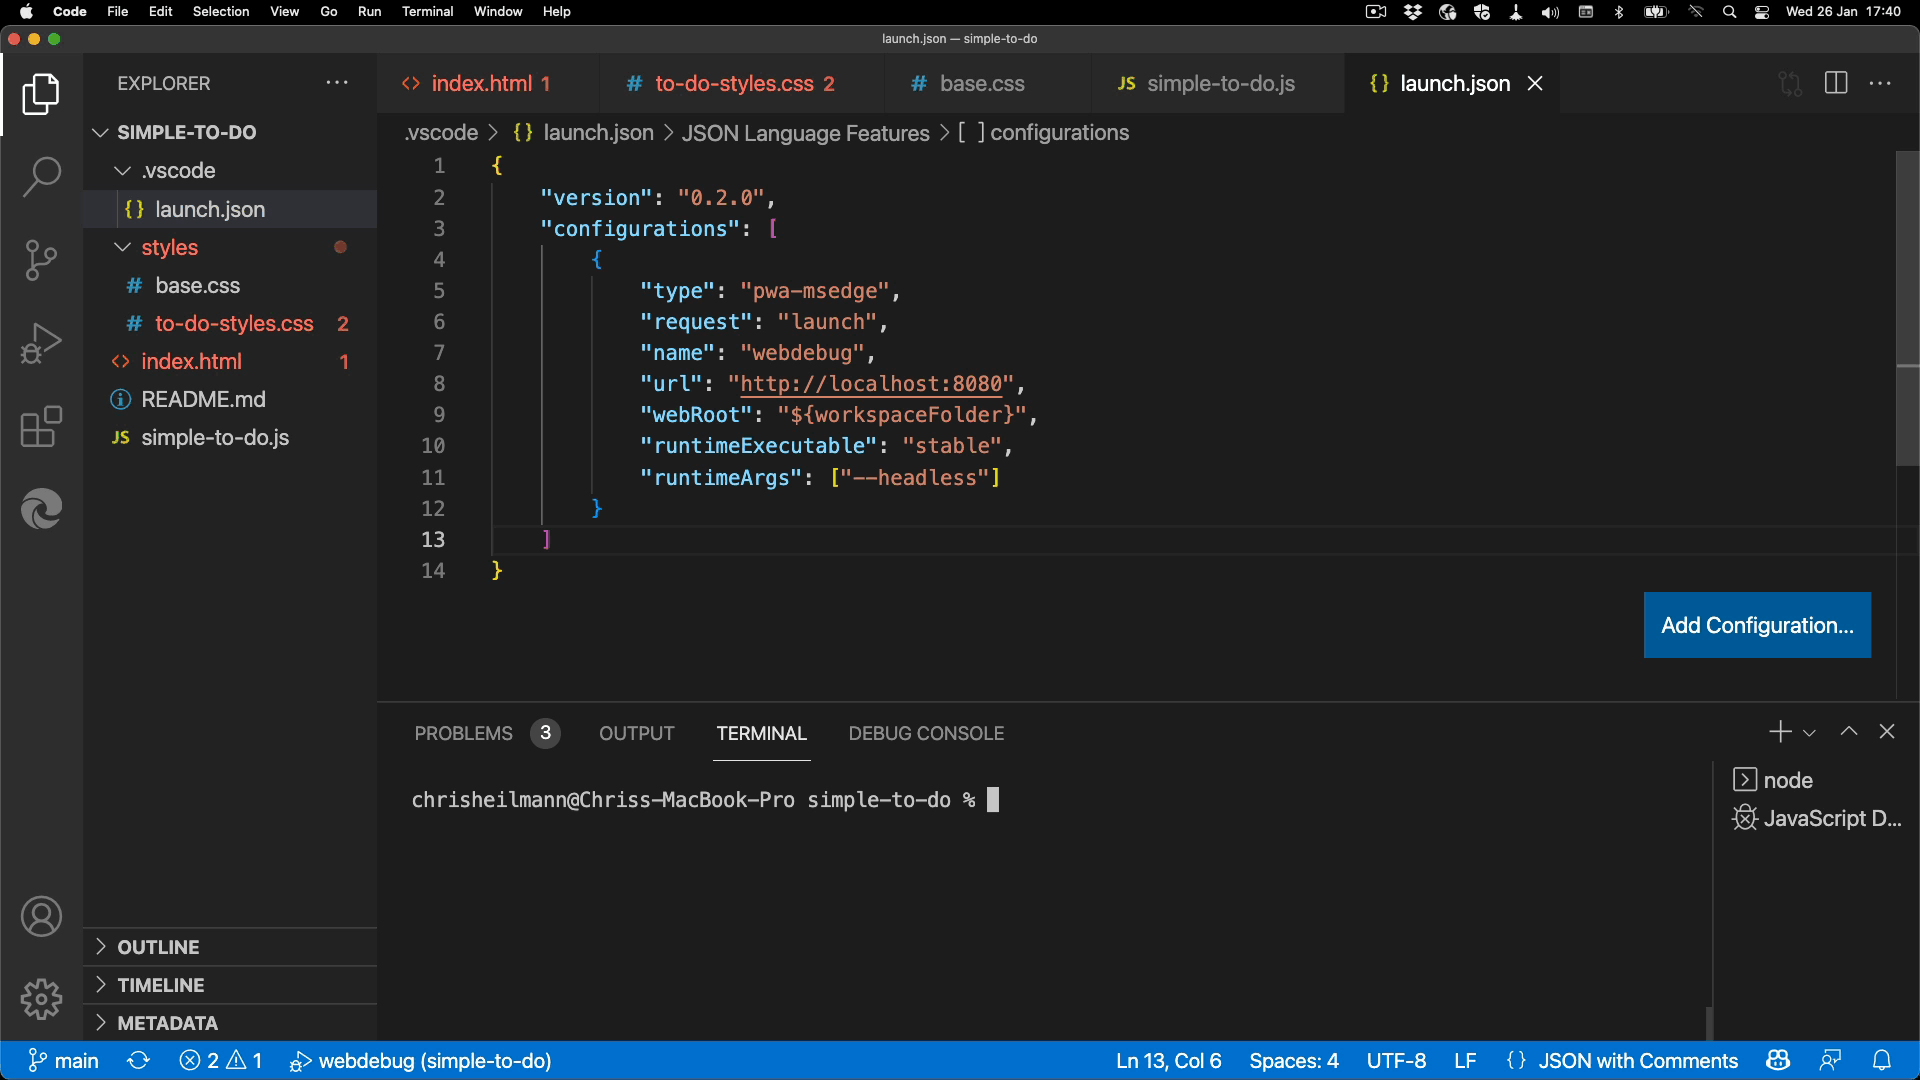 Starting a server in the VS Code Terminal